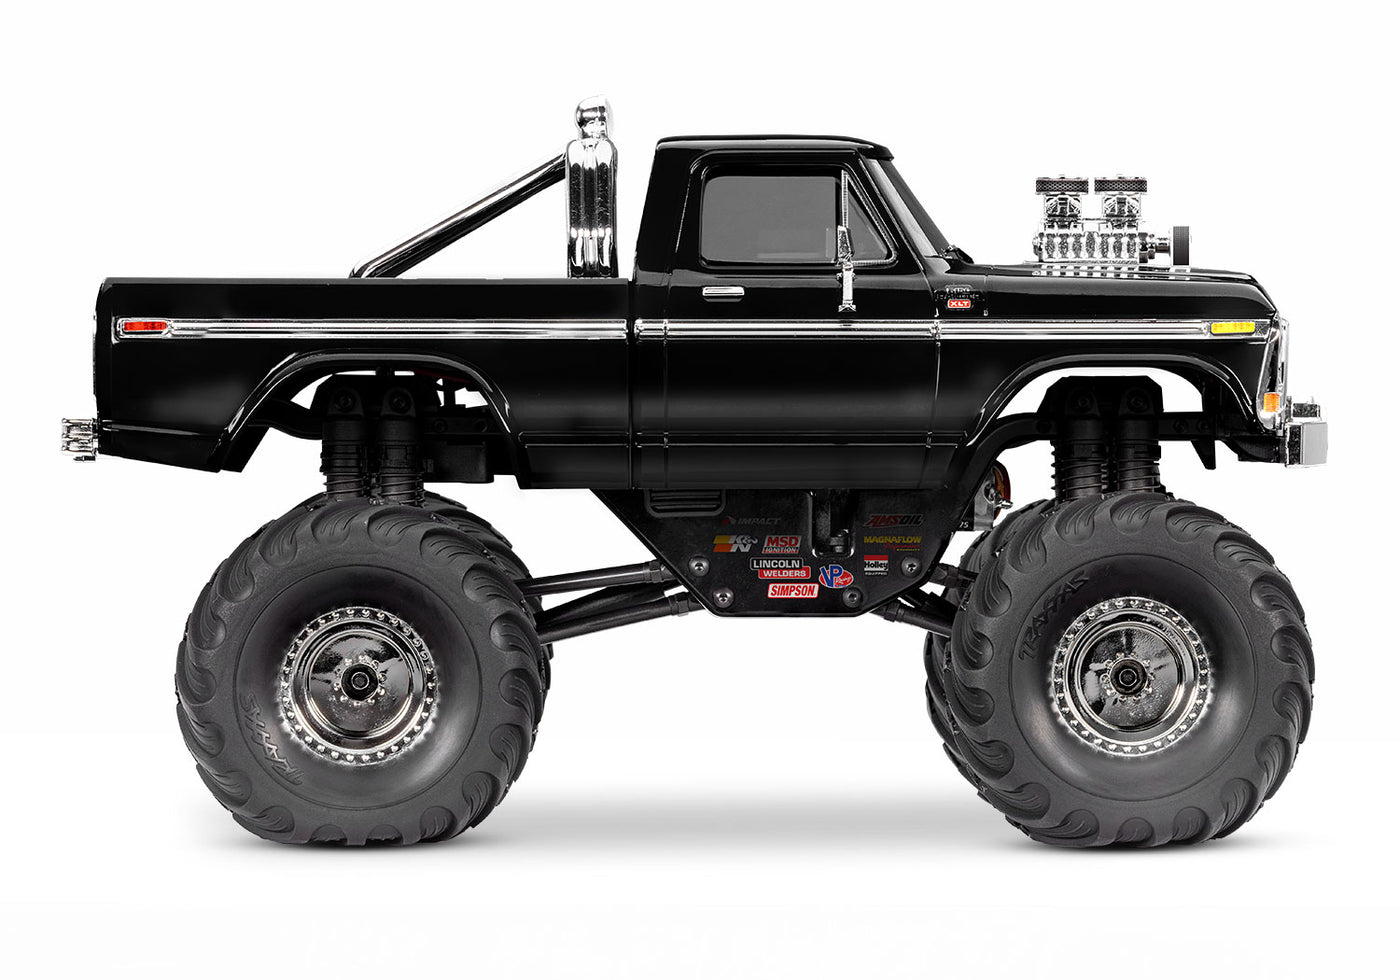 TRX-4MT™with Ford® F-150® pickup body: 1/18 scale 4X4 monster truck Traxxas #98044-1 In-store pickup only